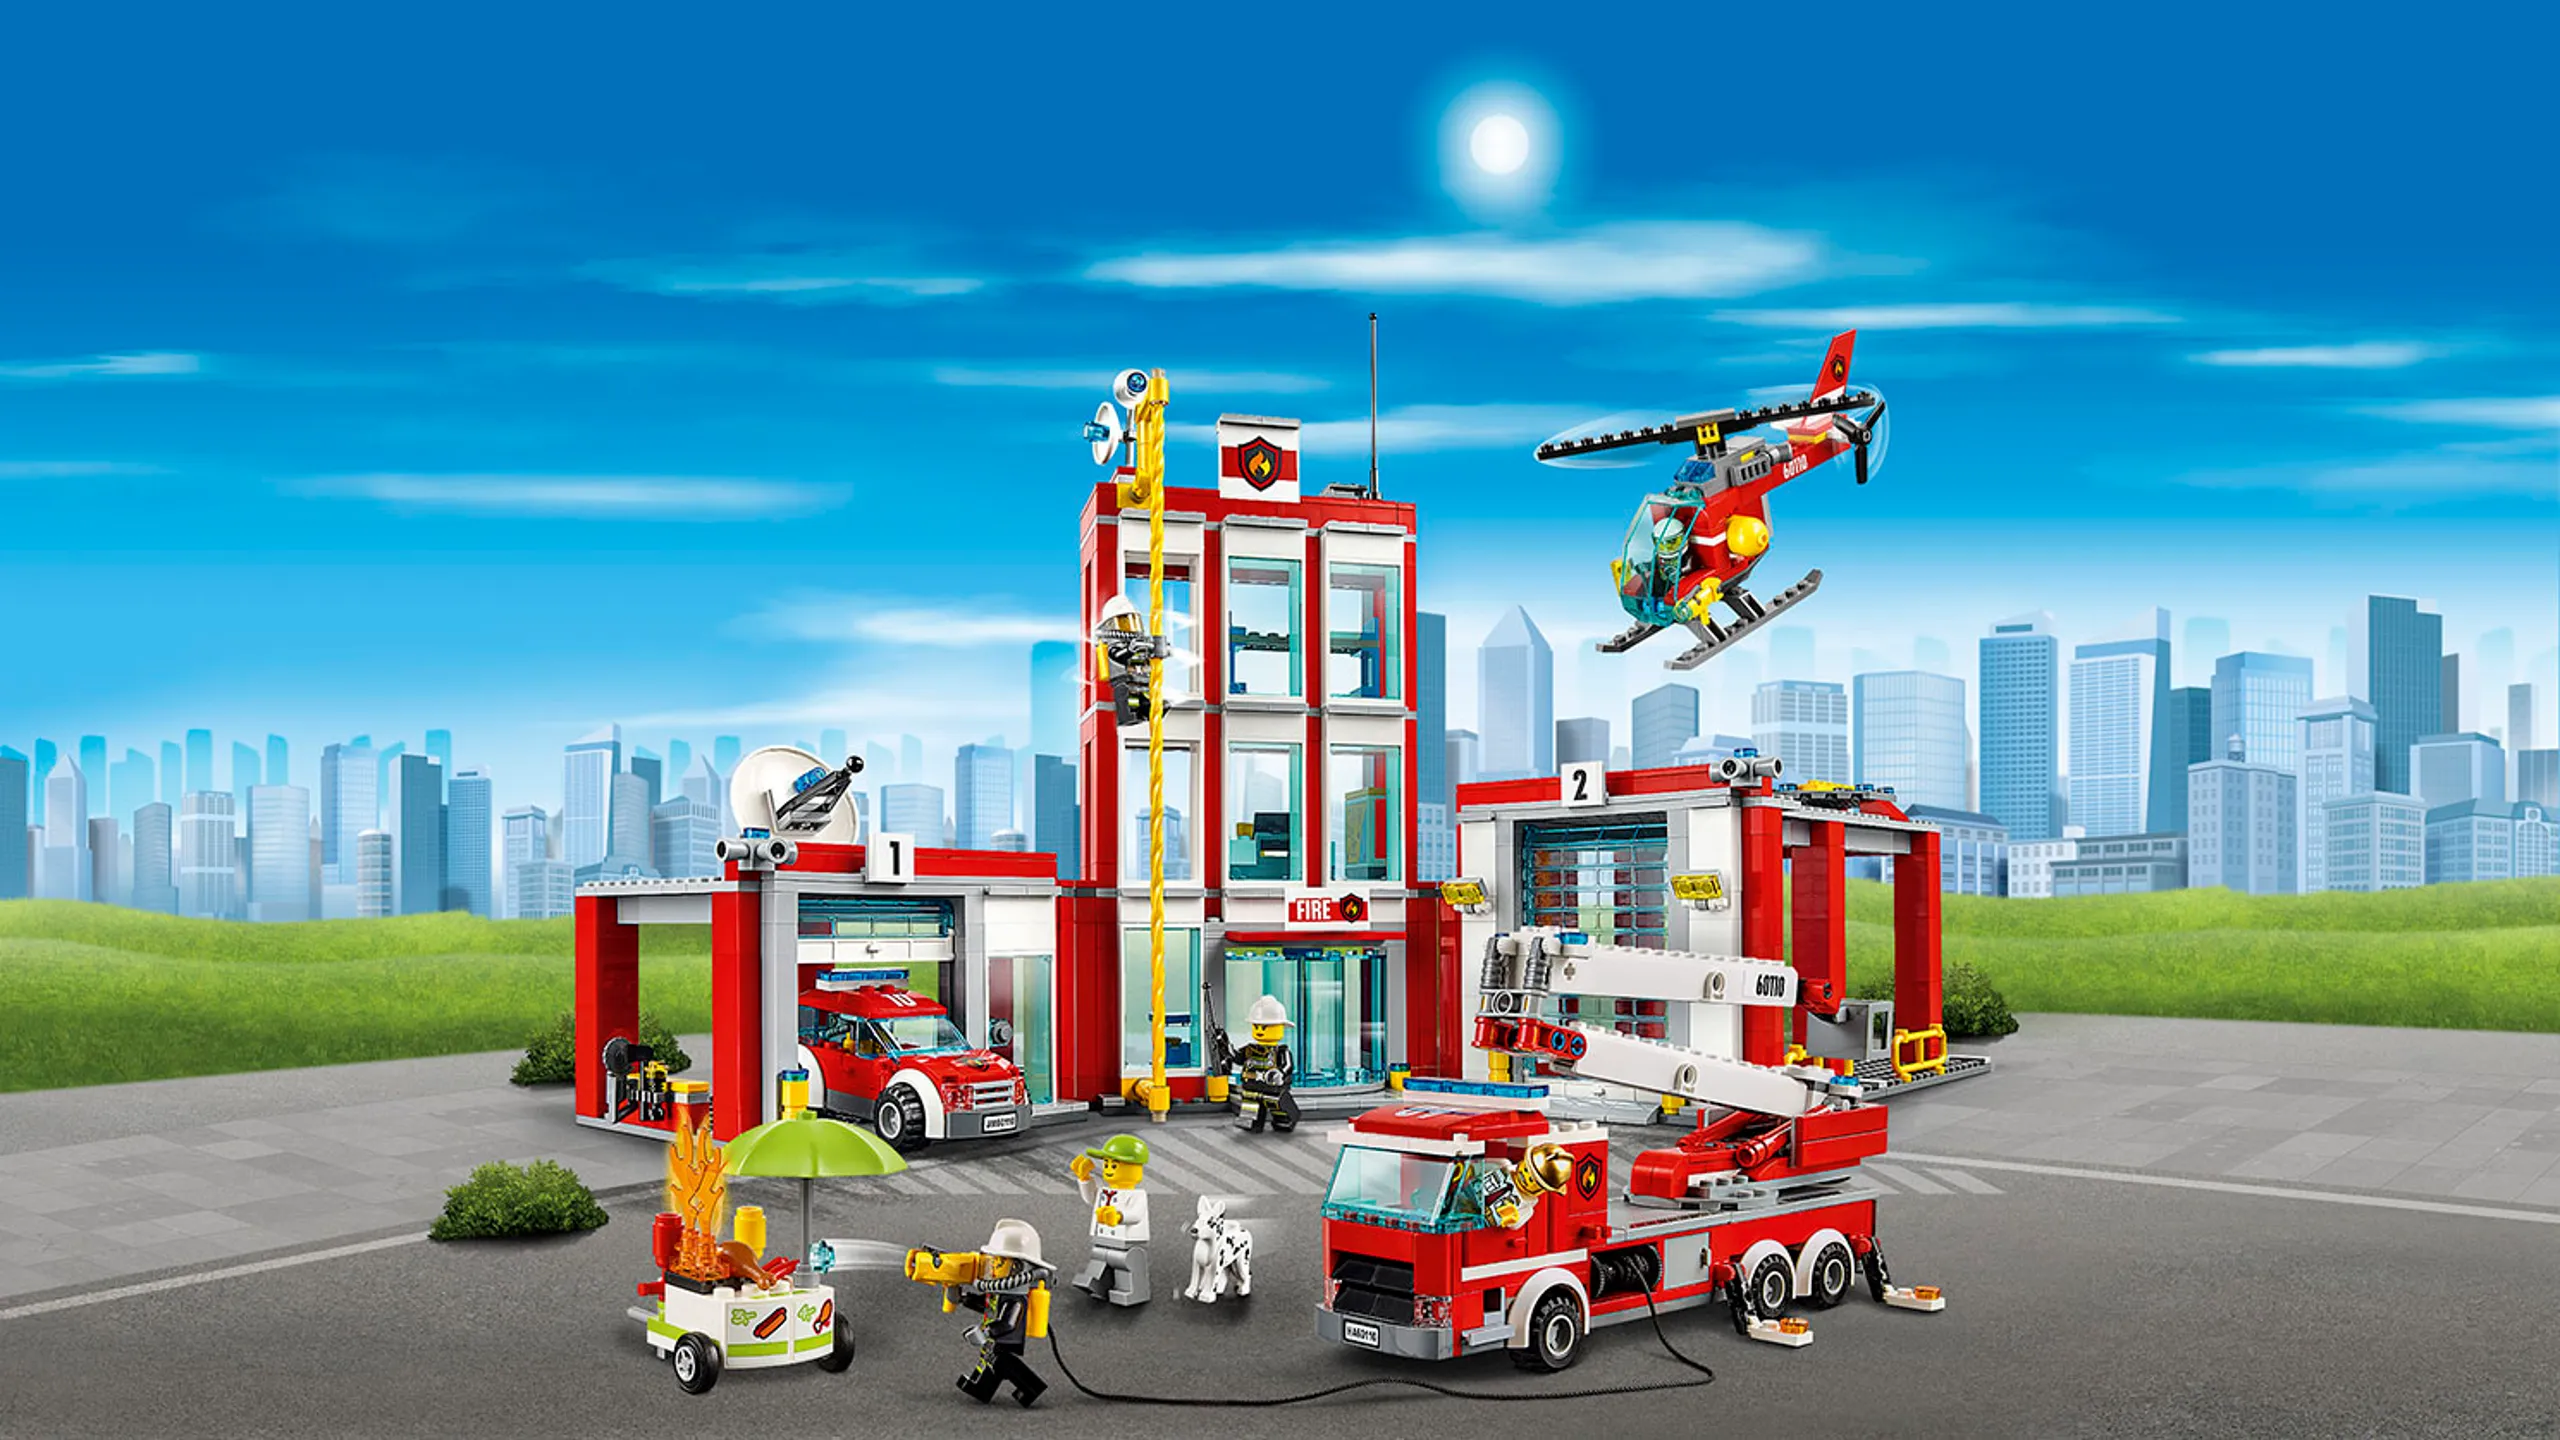 LEGO City Fire - 60110 Fire Station - The hot dog stand outside the fire station is on fire. Pull out the firehose and put out the fire!